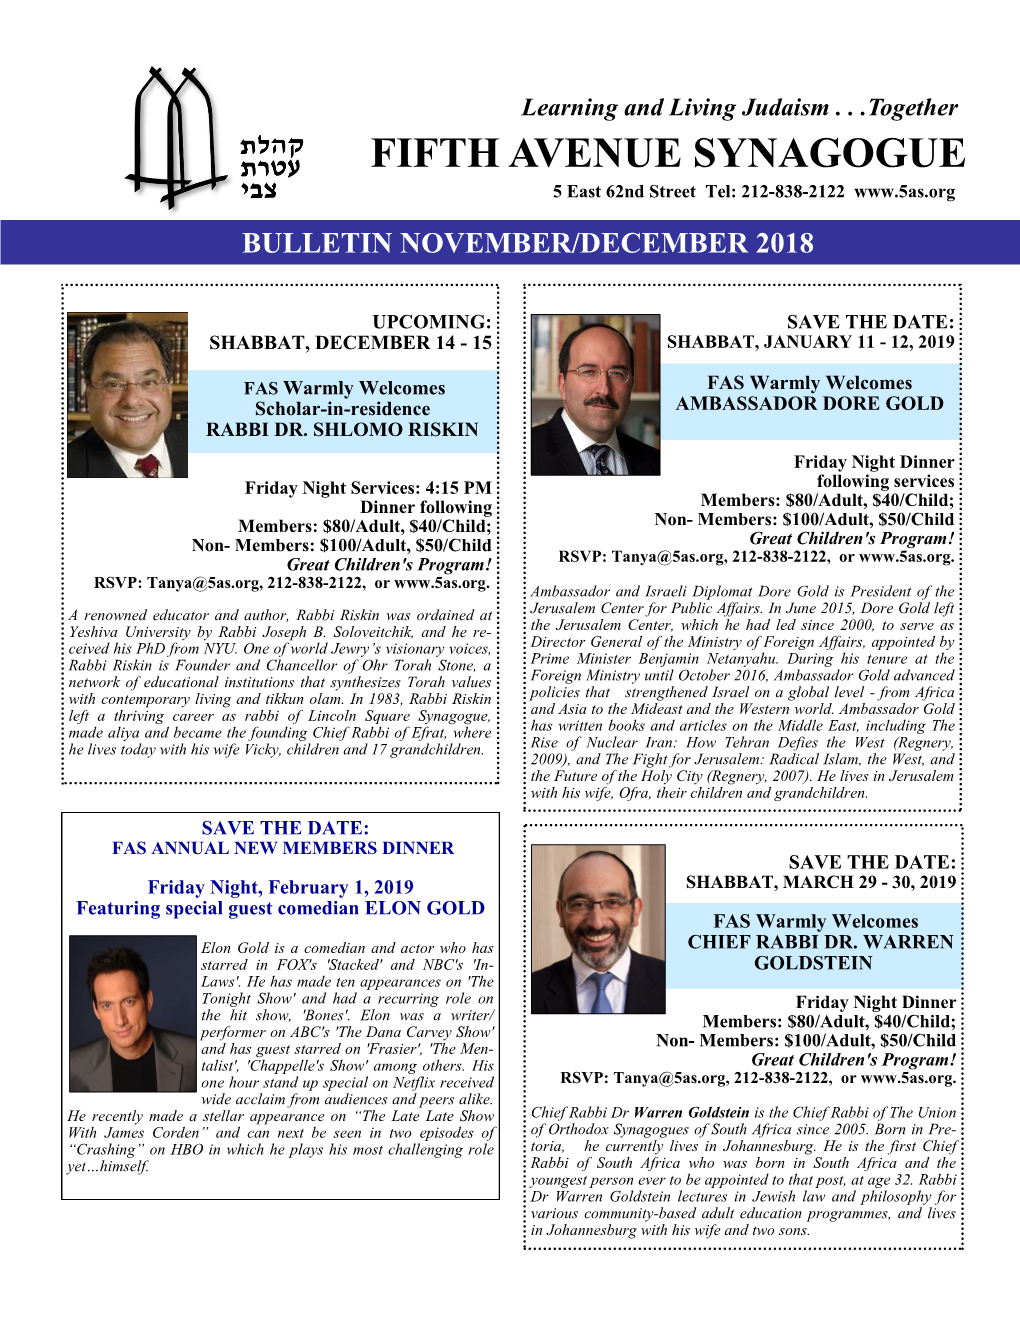 FIFTH AVENUE SYNAGOGUE 5 East 62Nd Street Tel: 212-838-2122